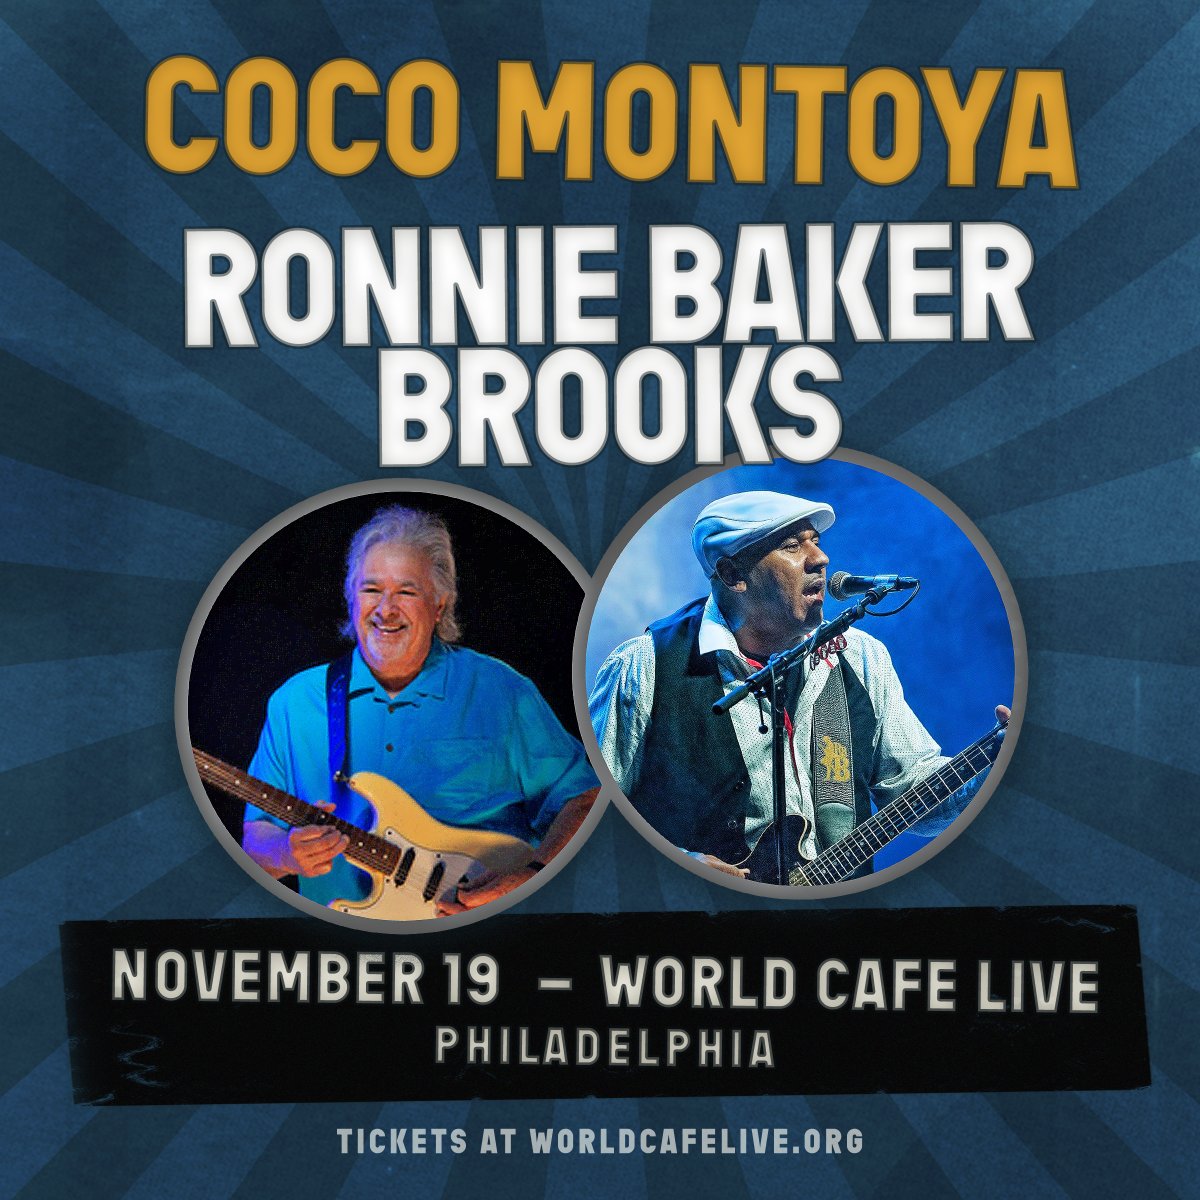 *Just Announced* Coco Montoya and Ronnie Baker Brooks team up for a blues-rock double header in Philly on November 19! Tickets go on sale 10am Friday: tinyurl.com/k9s55zsr